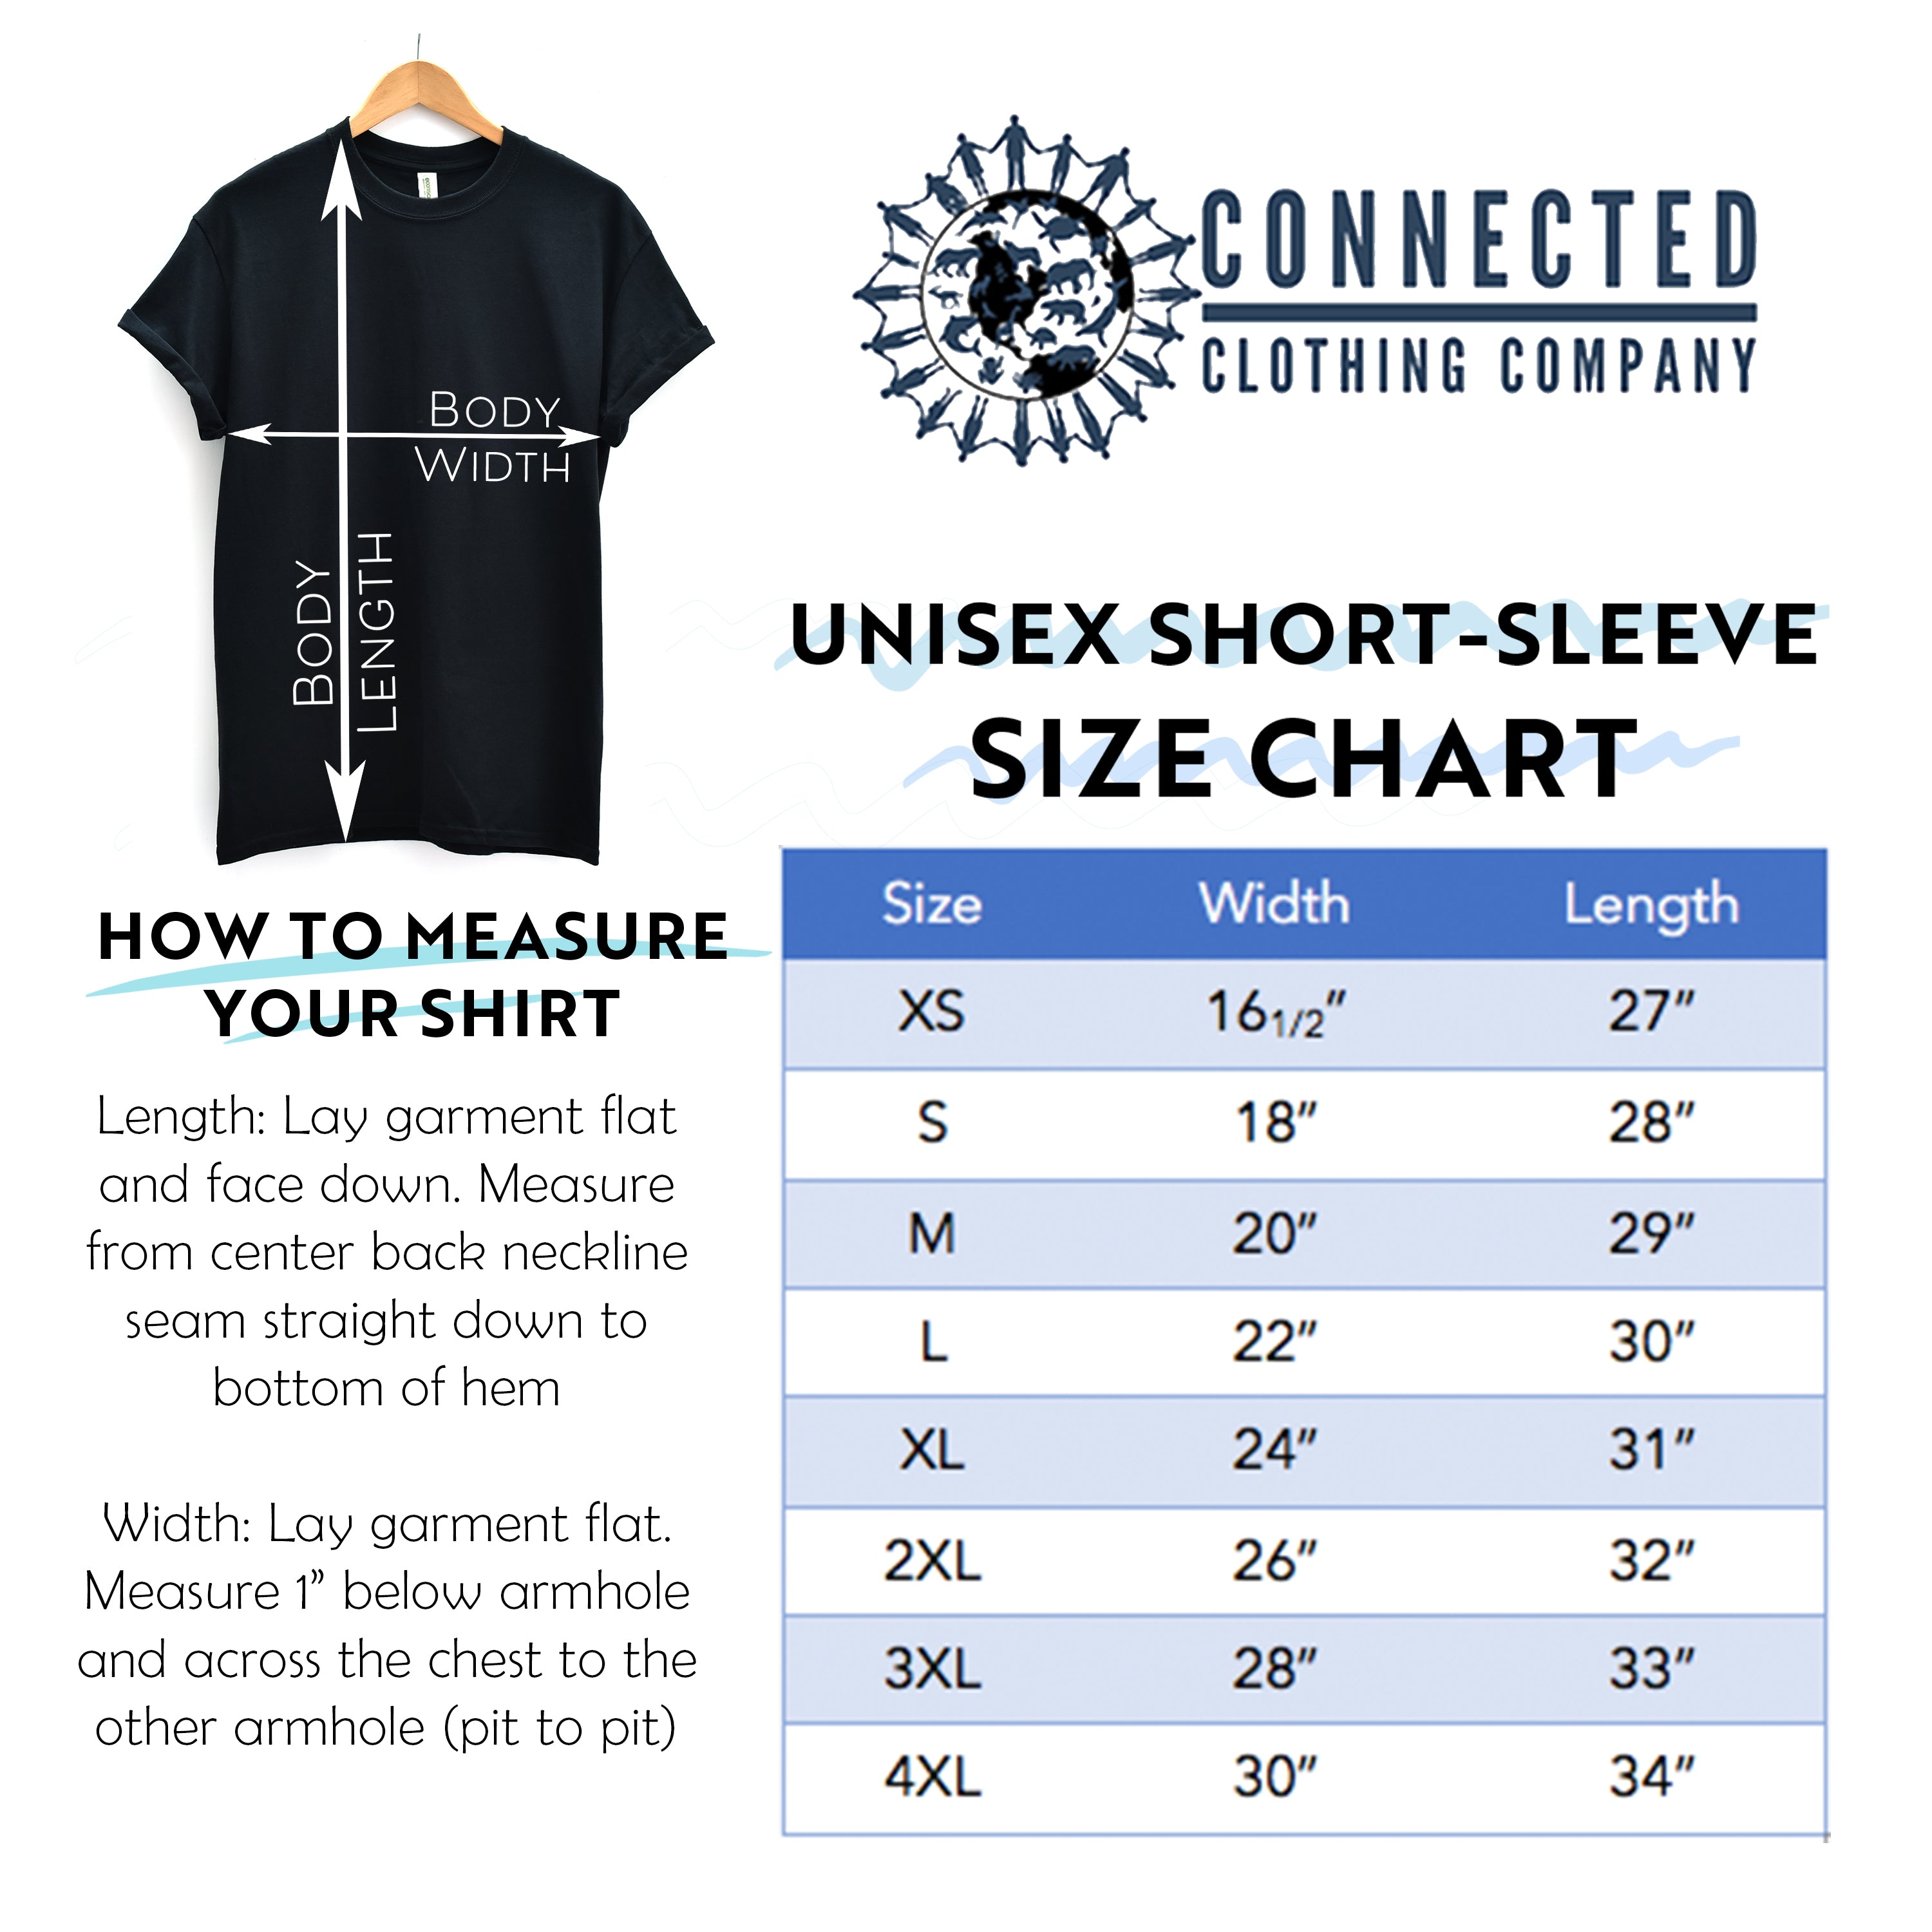 Unisex Short-Sleeve Tee Size Chart - marktwainstoryteller - Ethically and Sustainably Made - 10% donated to Mission Blue ocean conservation